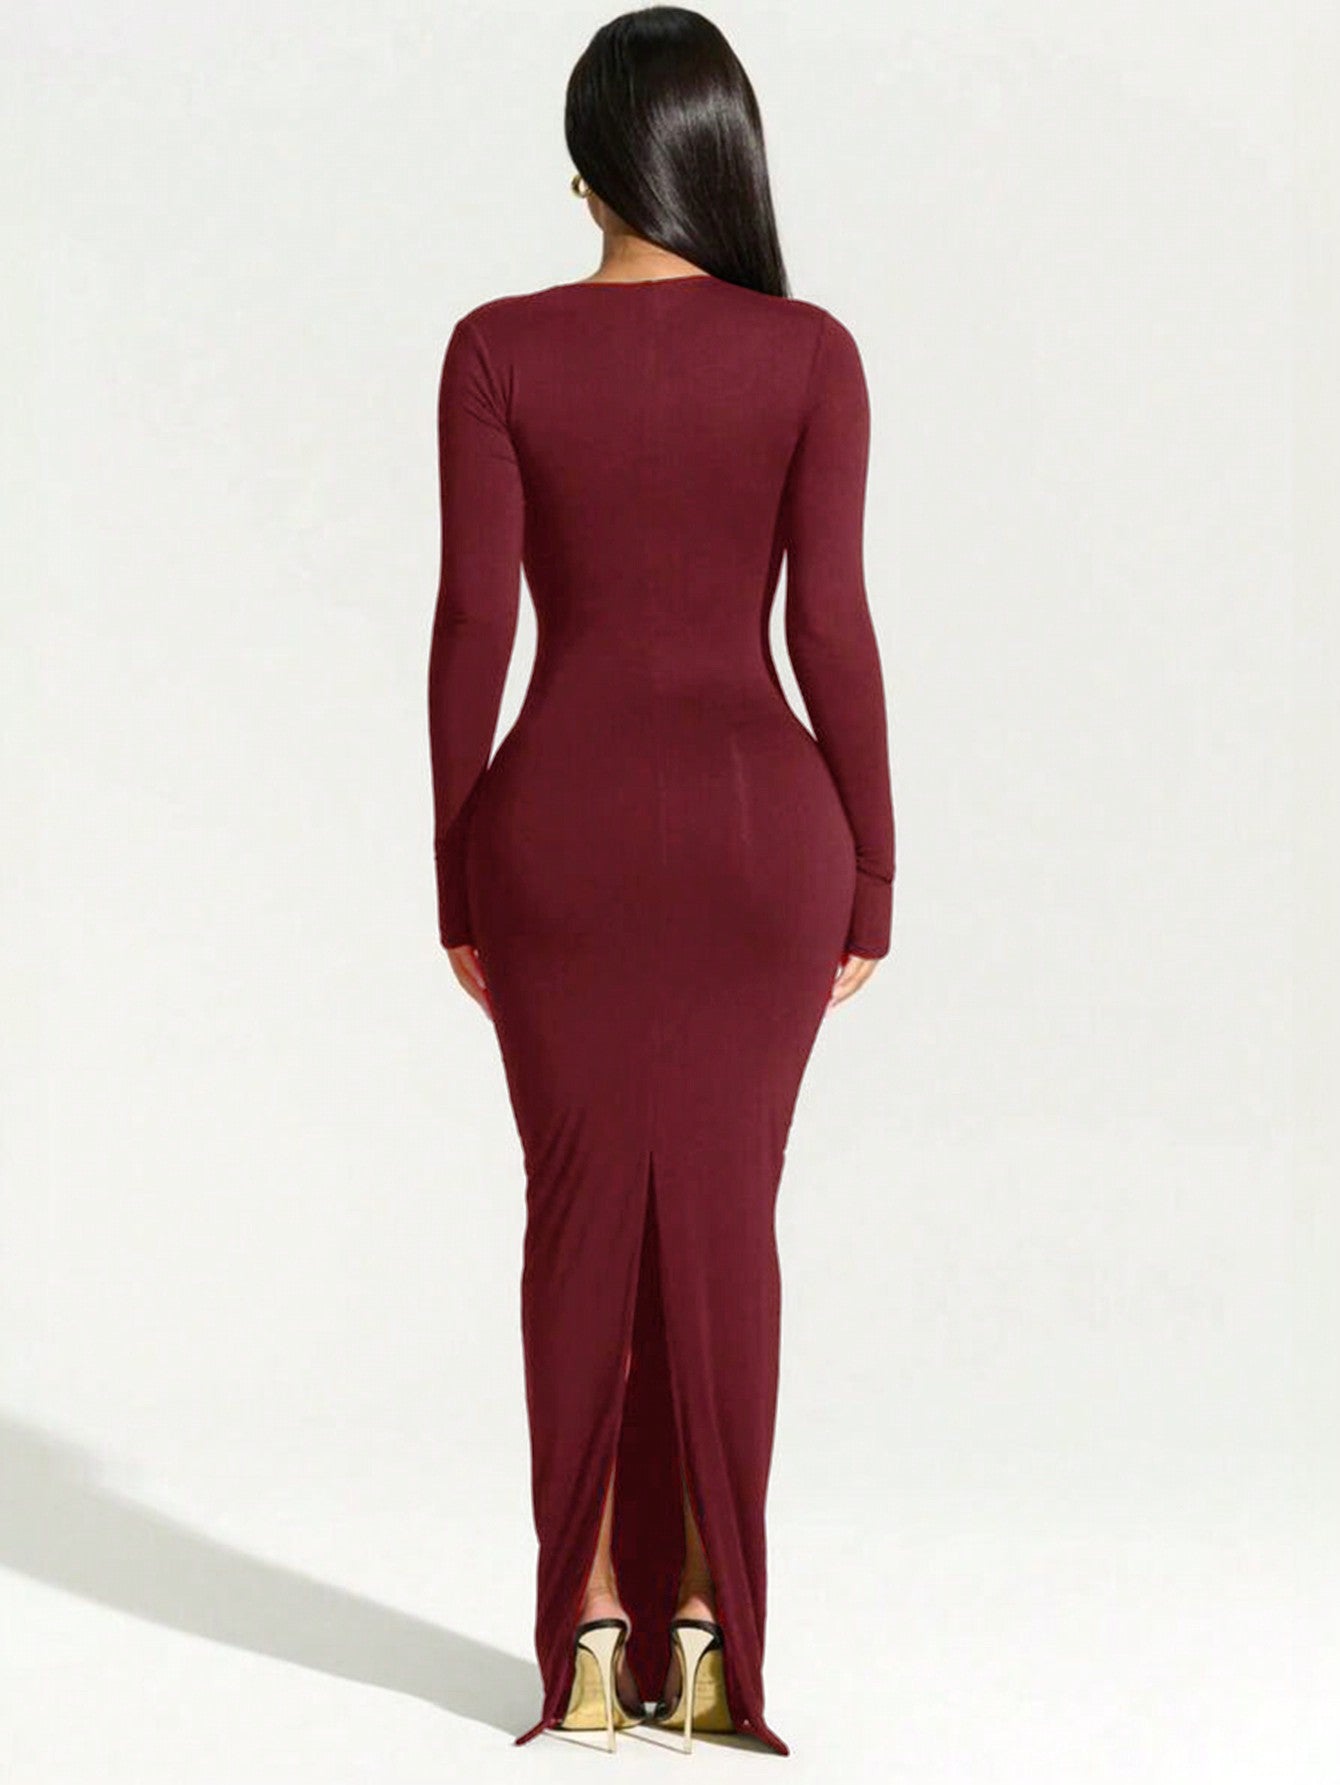 Women's Sexy Off-Shoulder Long Sleeve Bodycon Evening Dress With High Slit